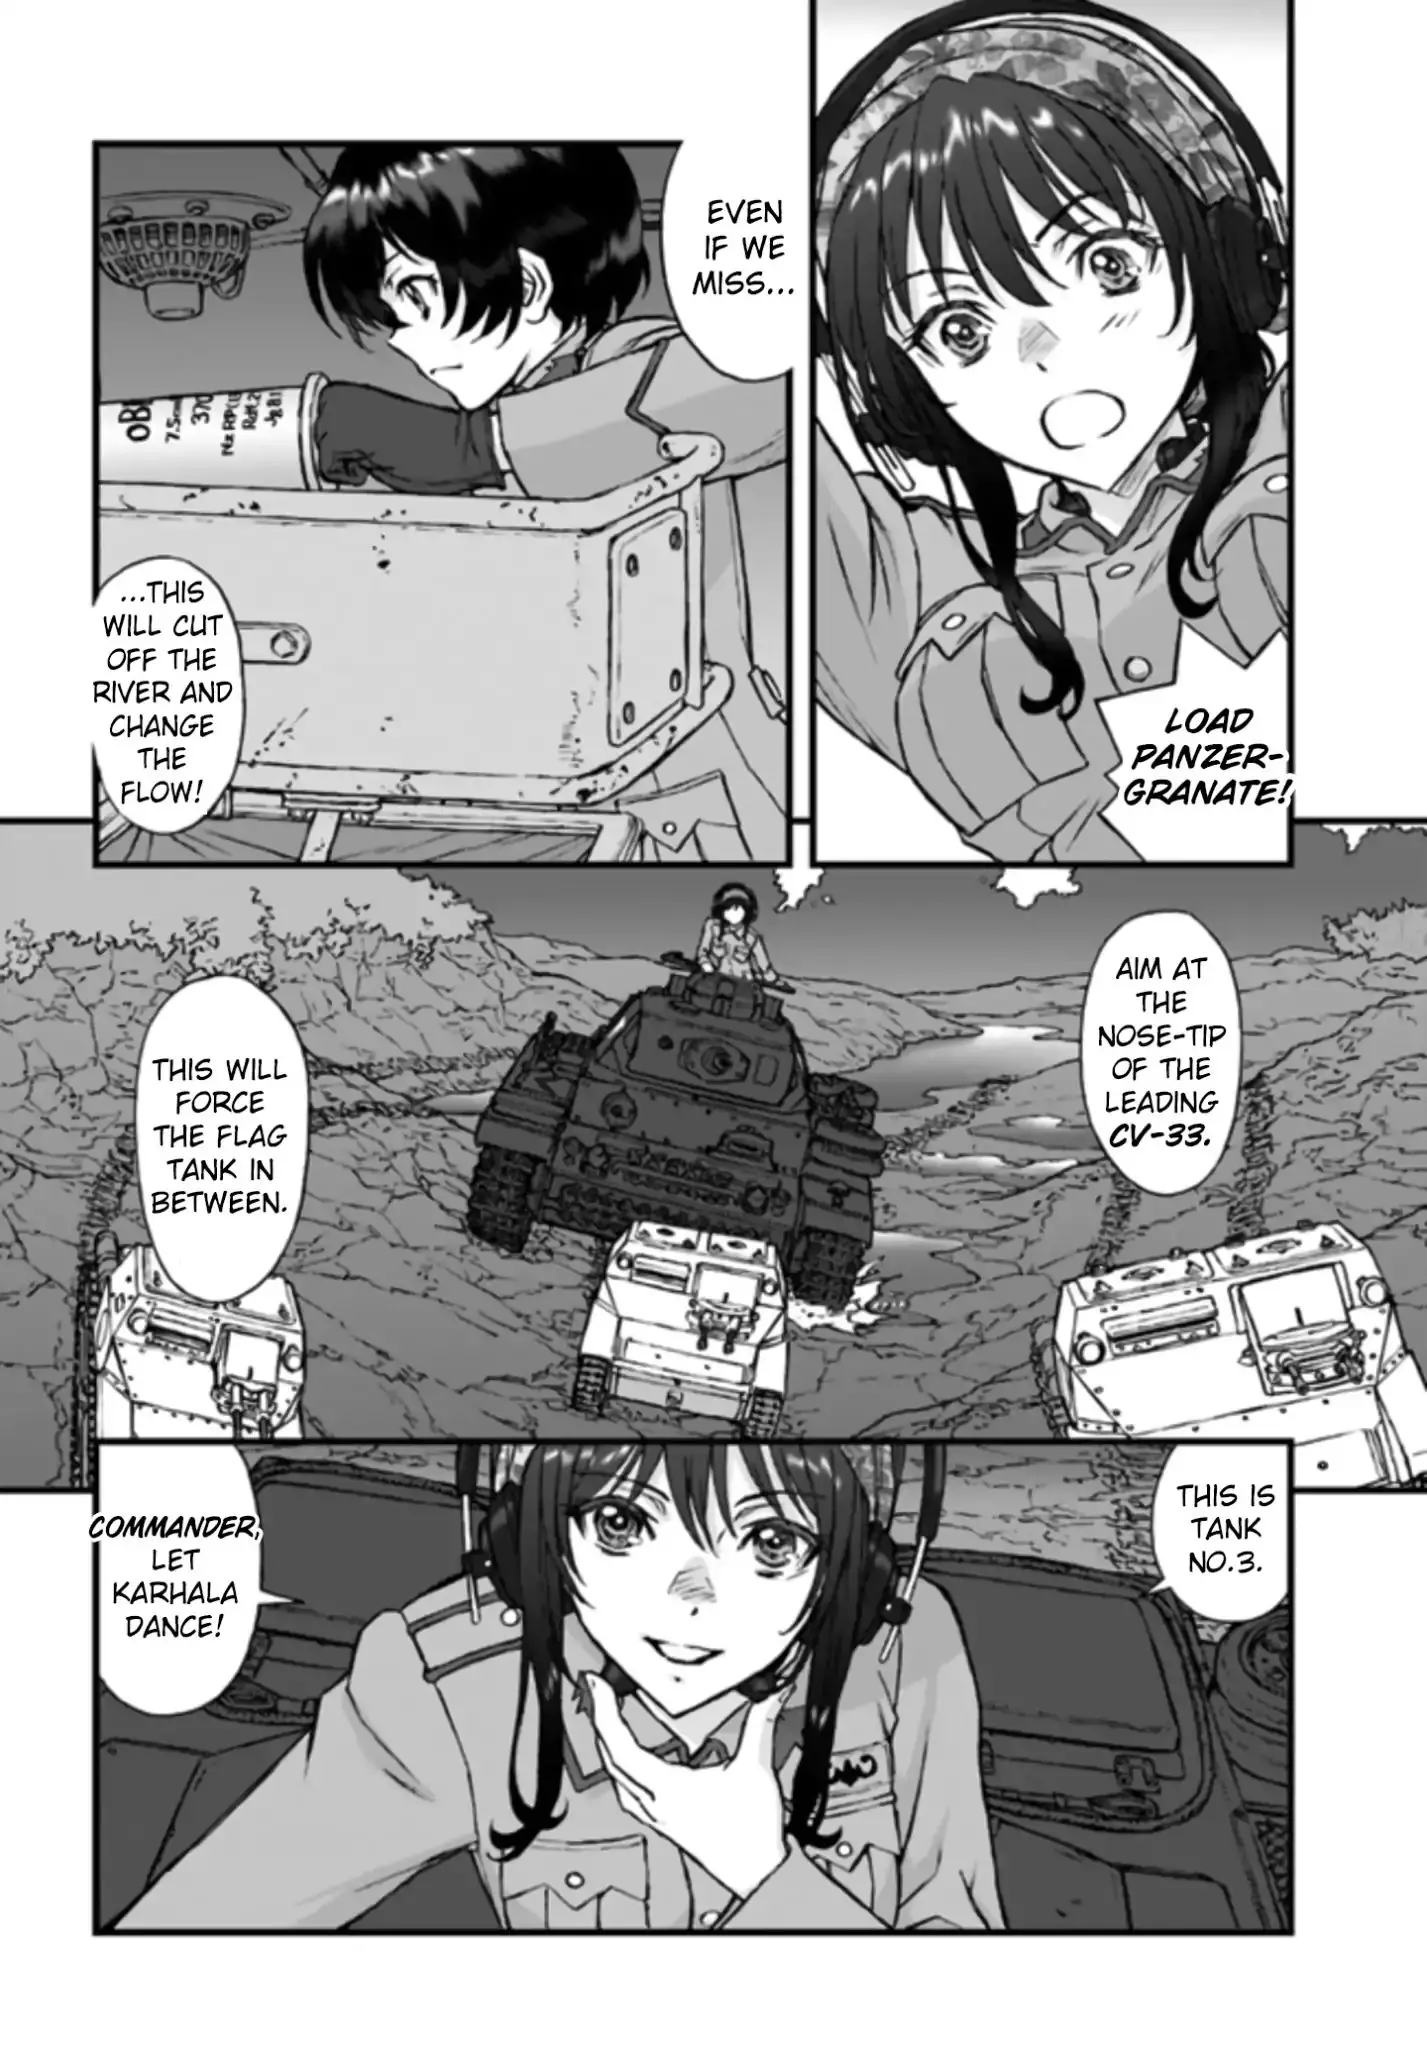 Girls Und Panzer - The Fir Tree And The Iron-Winged Witch - 3 page 3